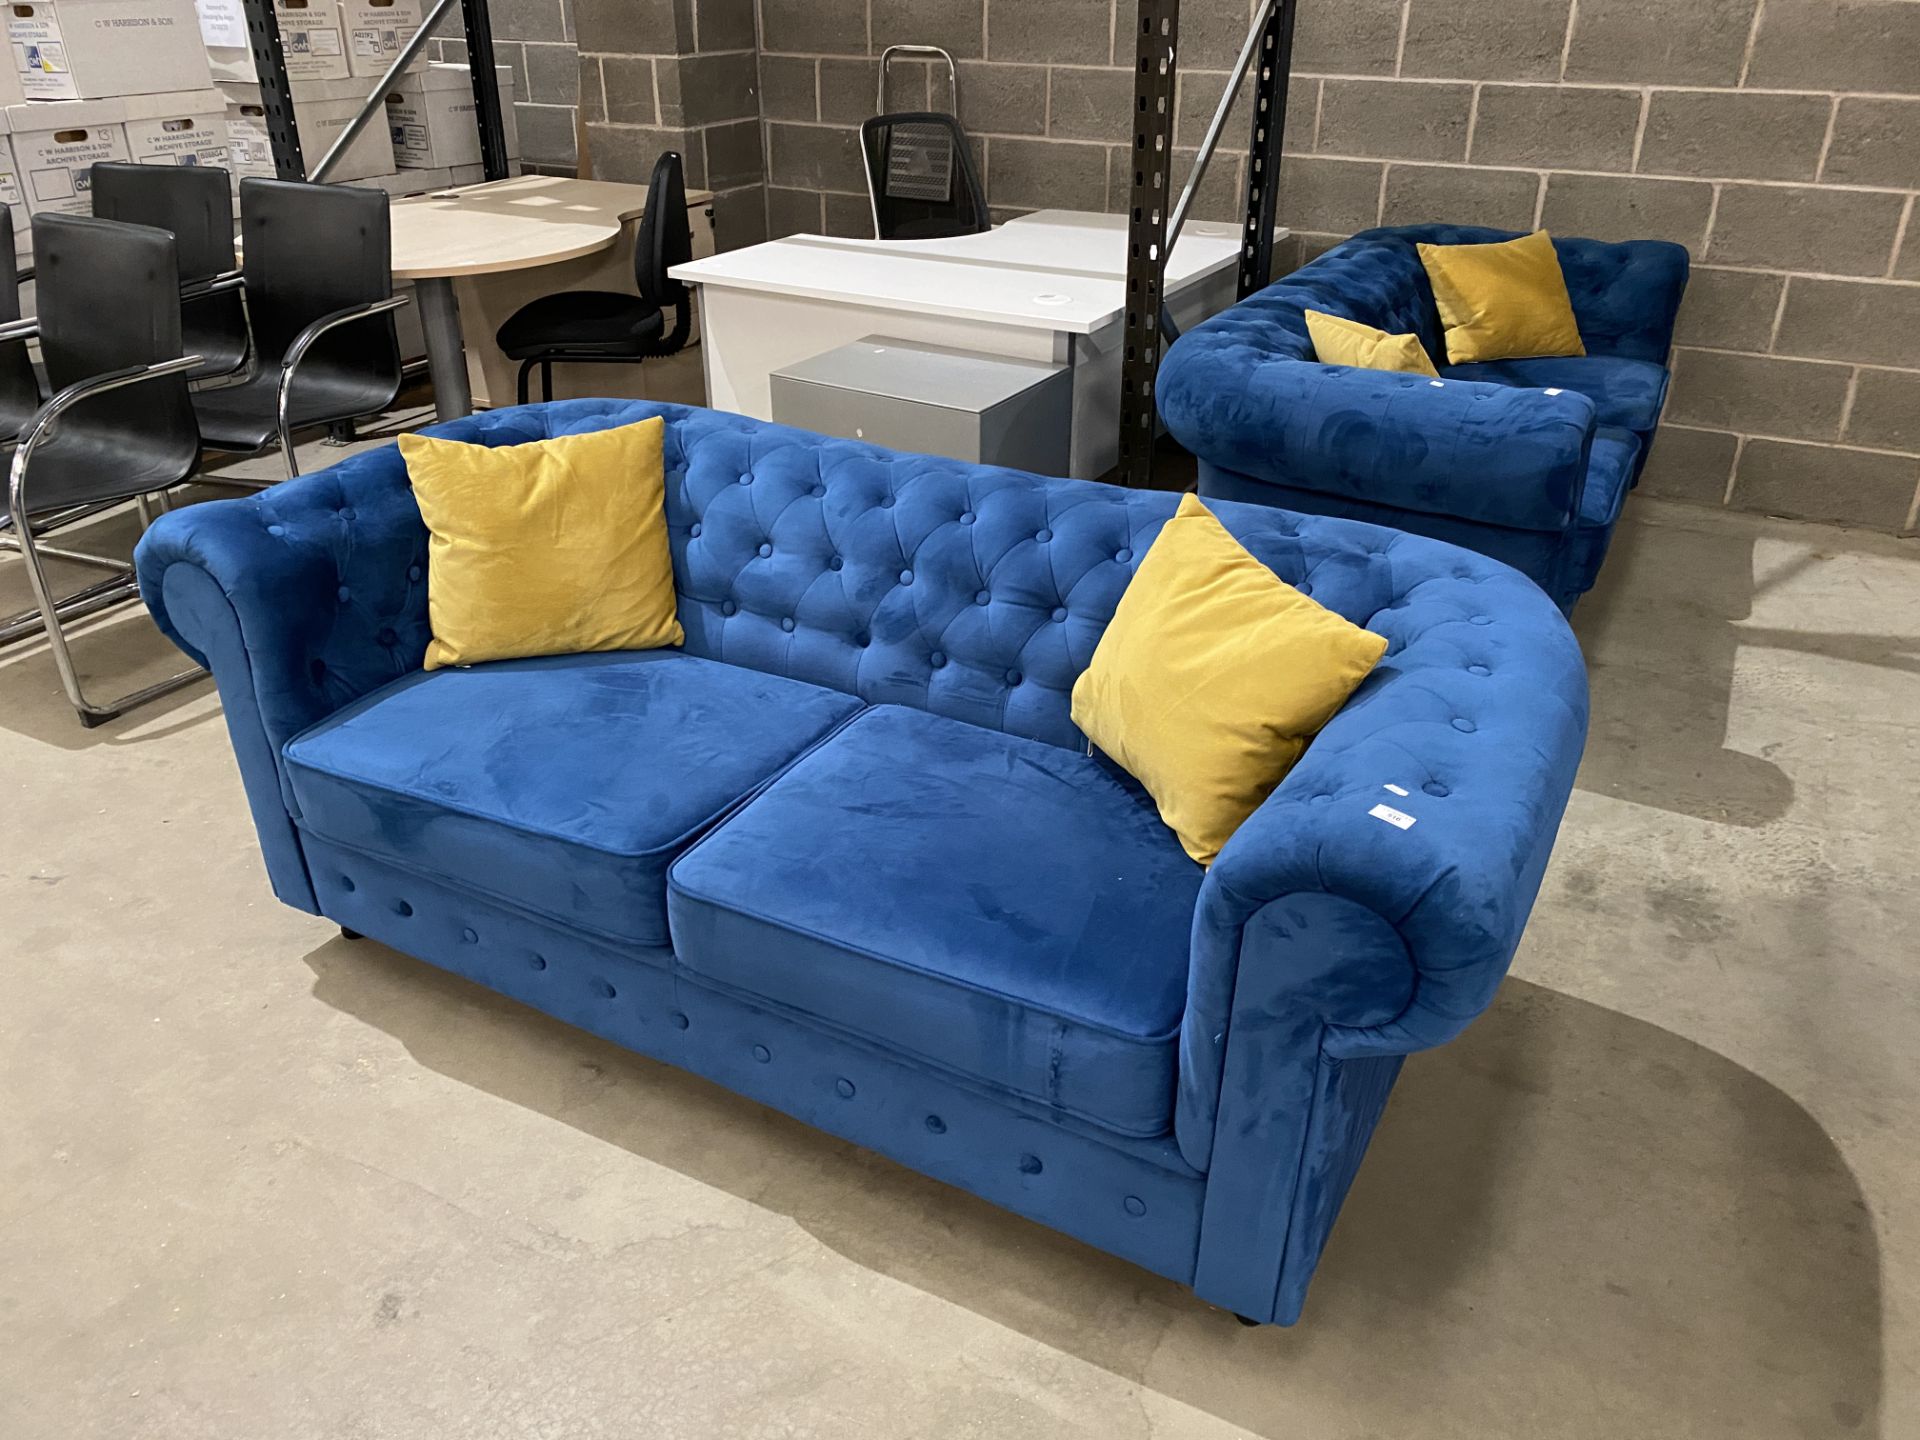 Blue upholstered button-backed Chesterfield style 2-seater sofa complete with cushions (saleroom - Image 5 of 11